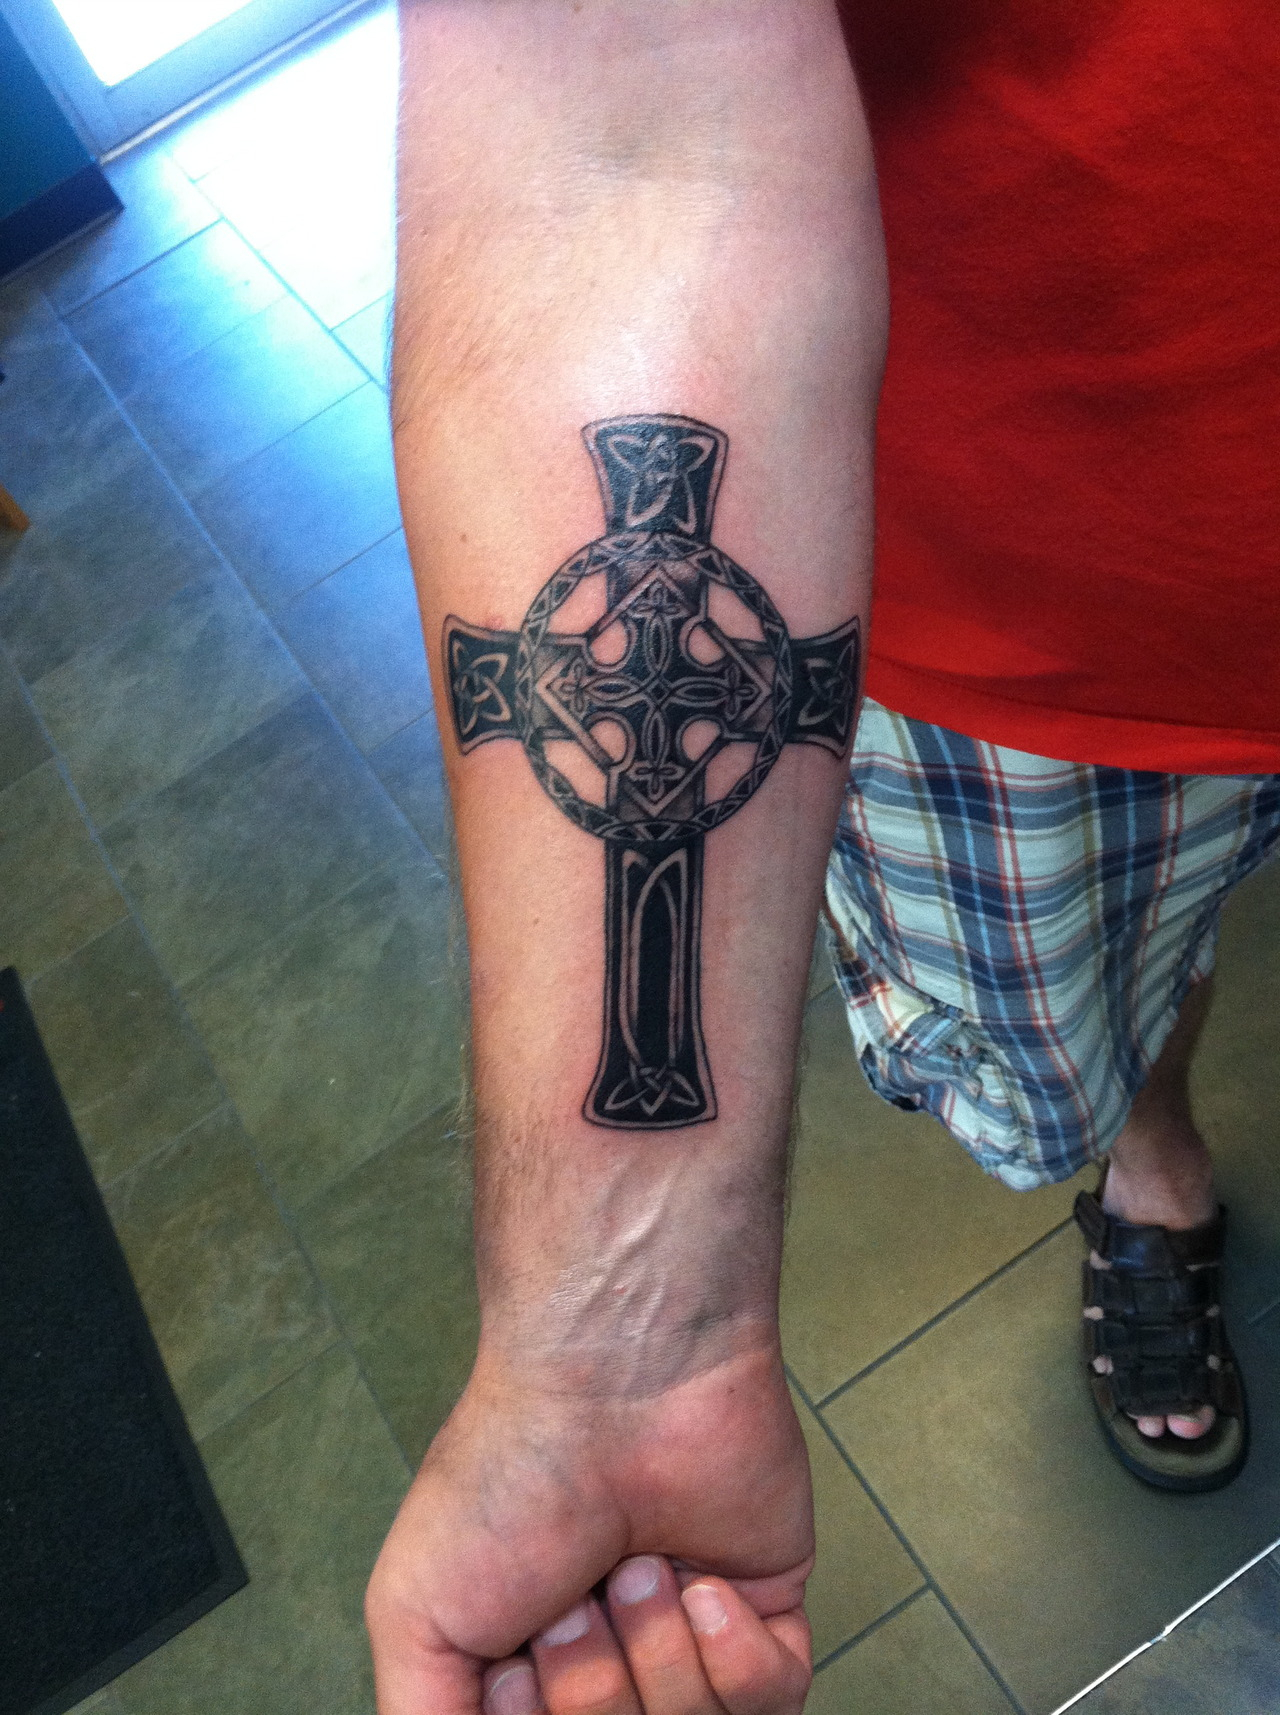 75 Unique Hottest Cross Tattoos Ideas Media Democracy intended for measurements 1280 X 1715